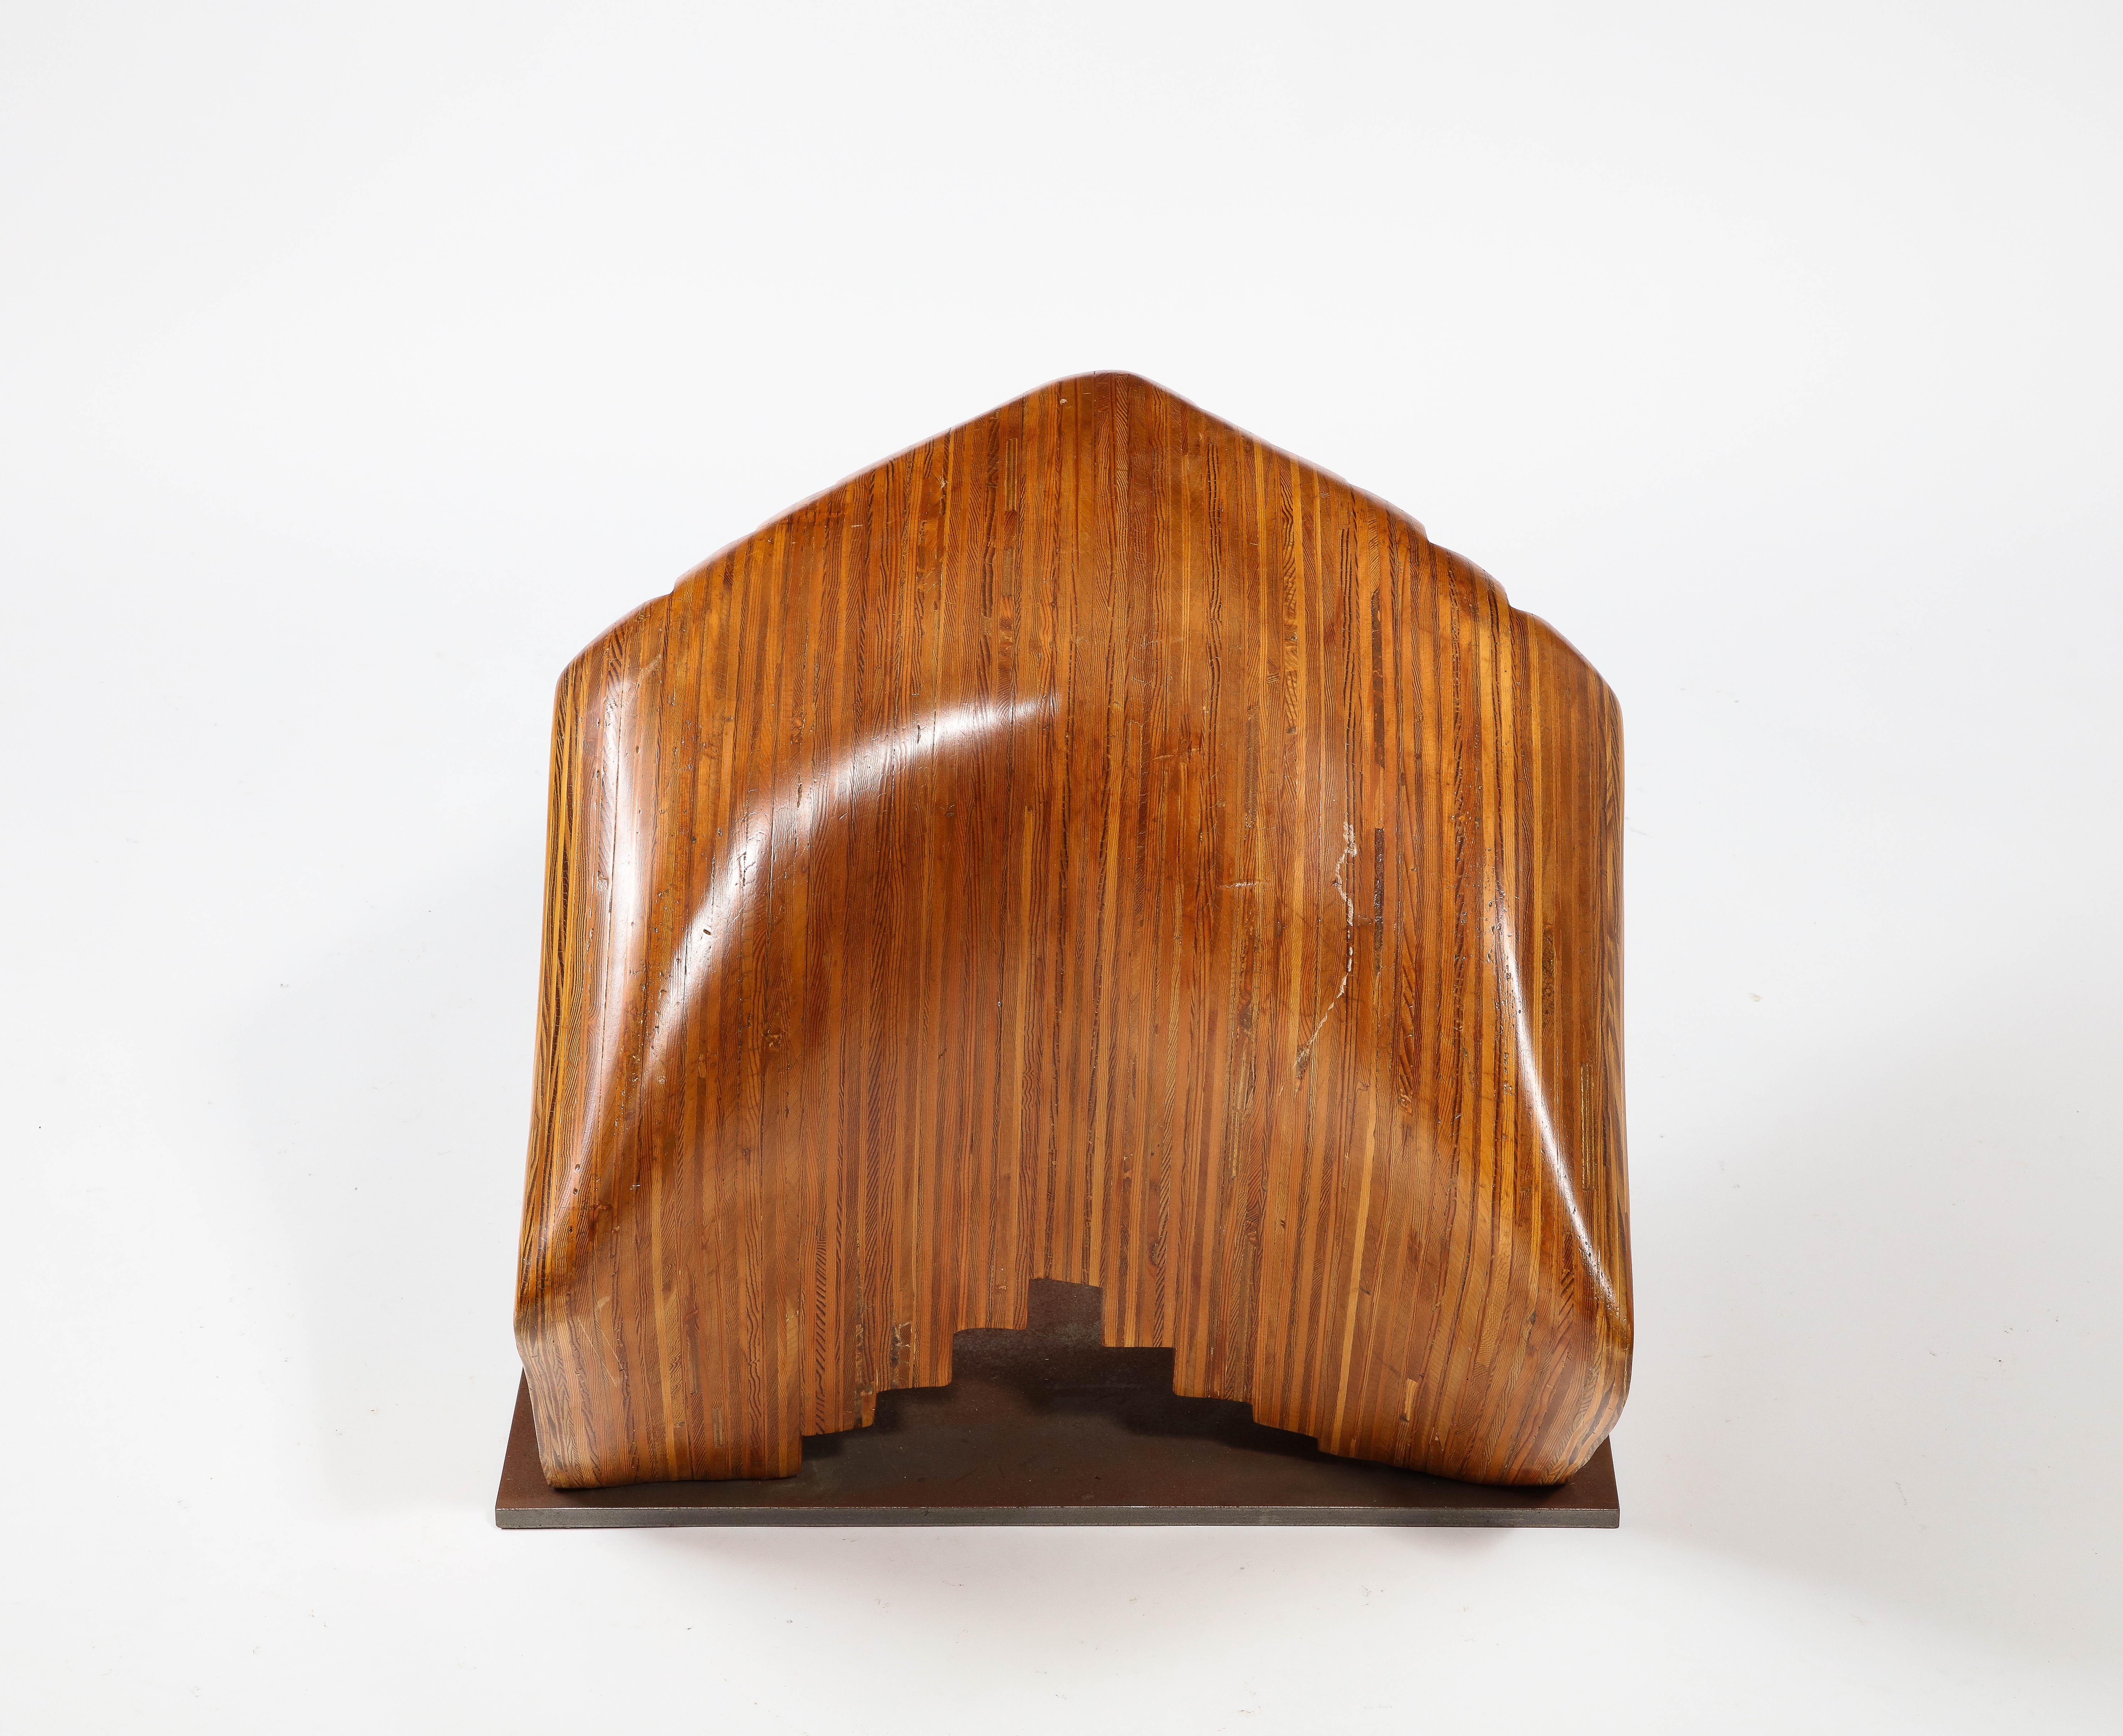 Object / Stool in laminated hardwood, a style seen in the work of Teinreiro and Cospen, a fascinating shape that can be both an object and a seat.